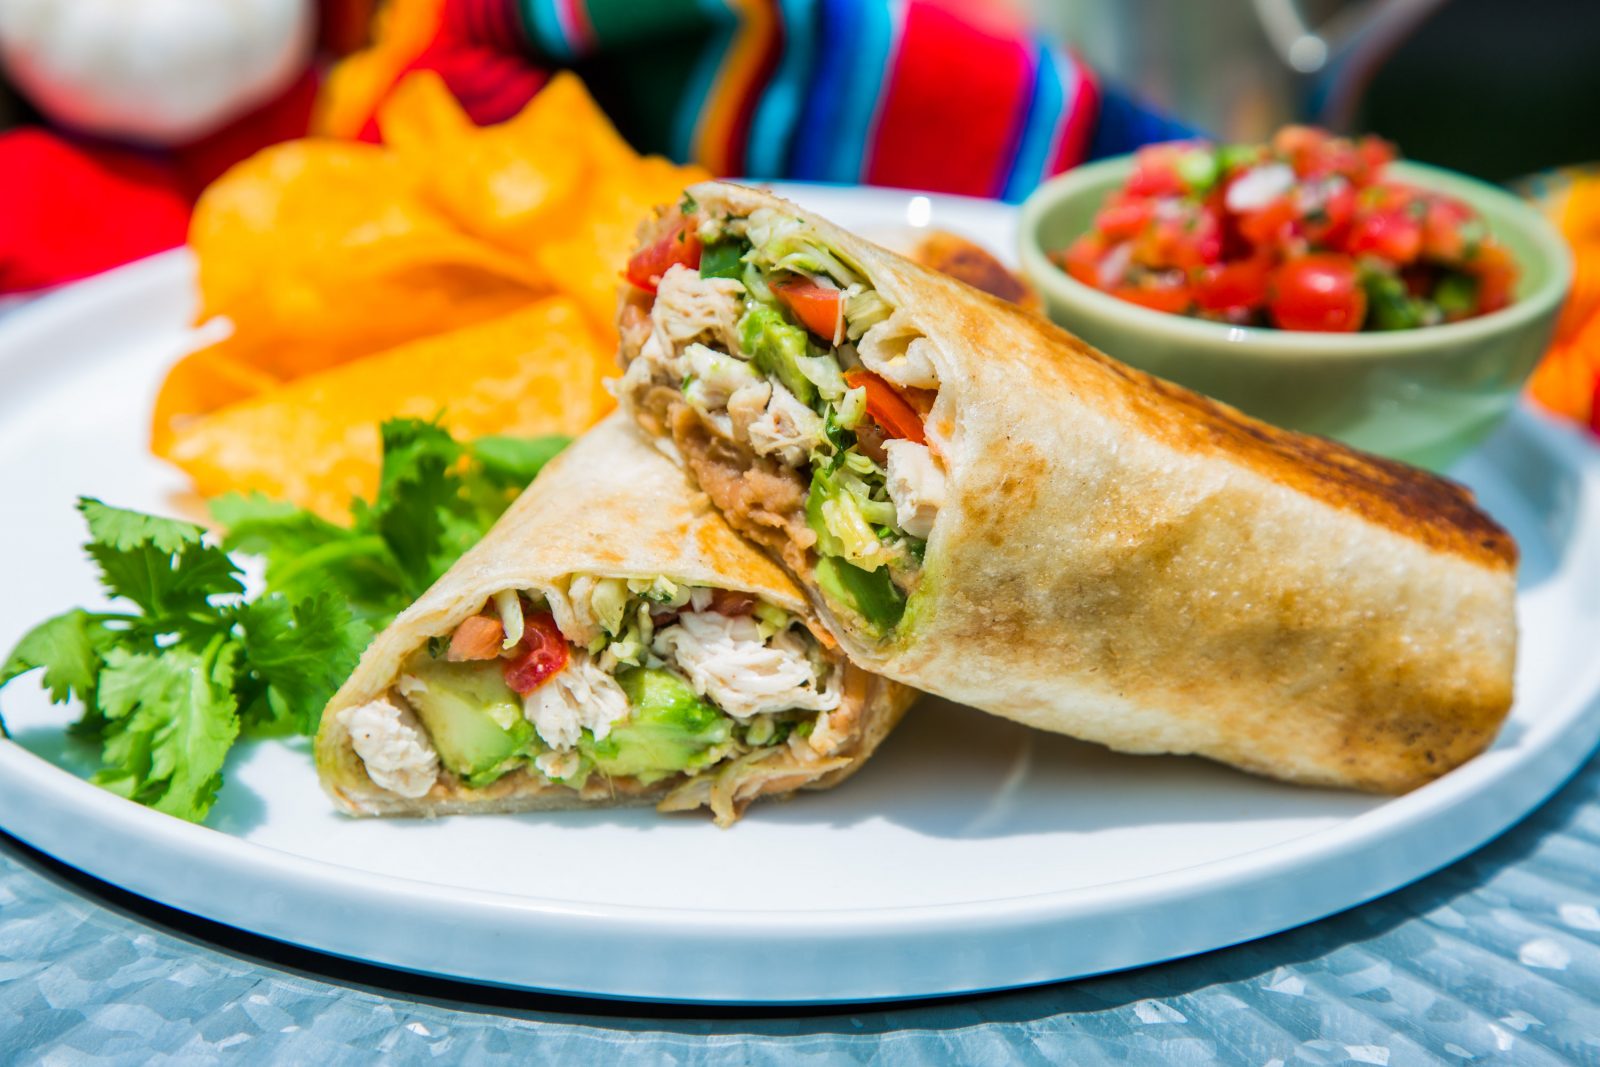 🍴 If You Eat 8/25 of These Foods With a Fork, You’re Forking Ridiculous Burrito